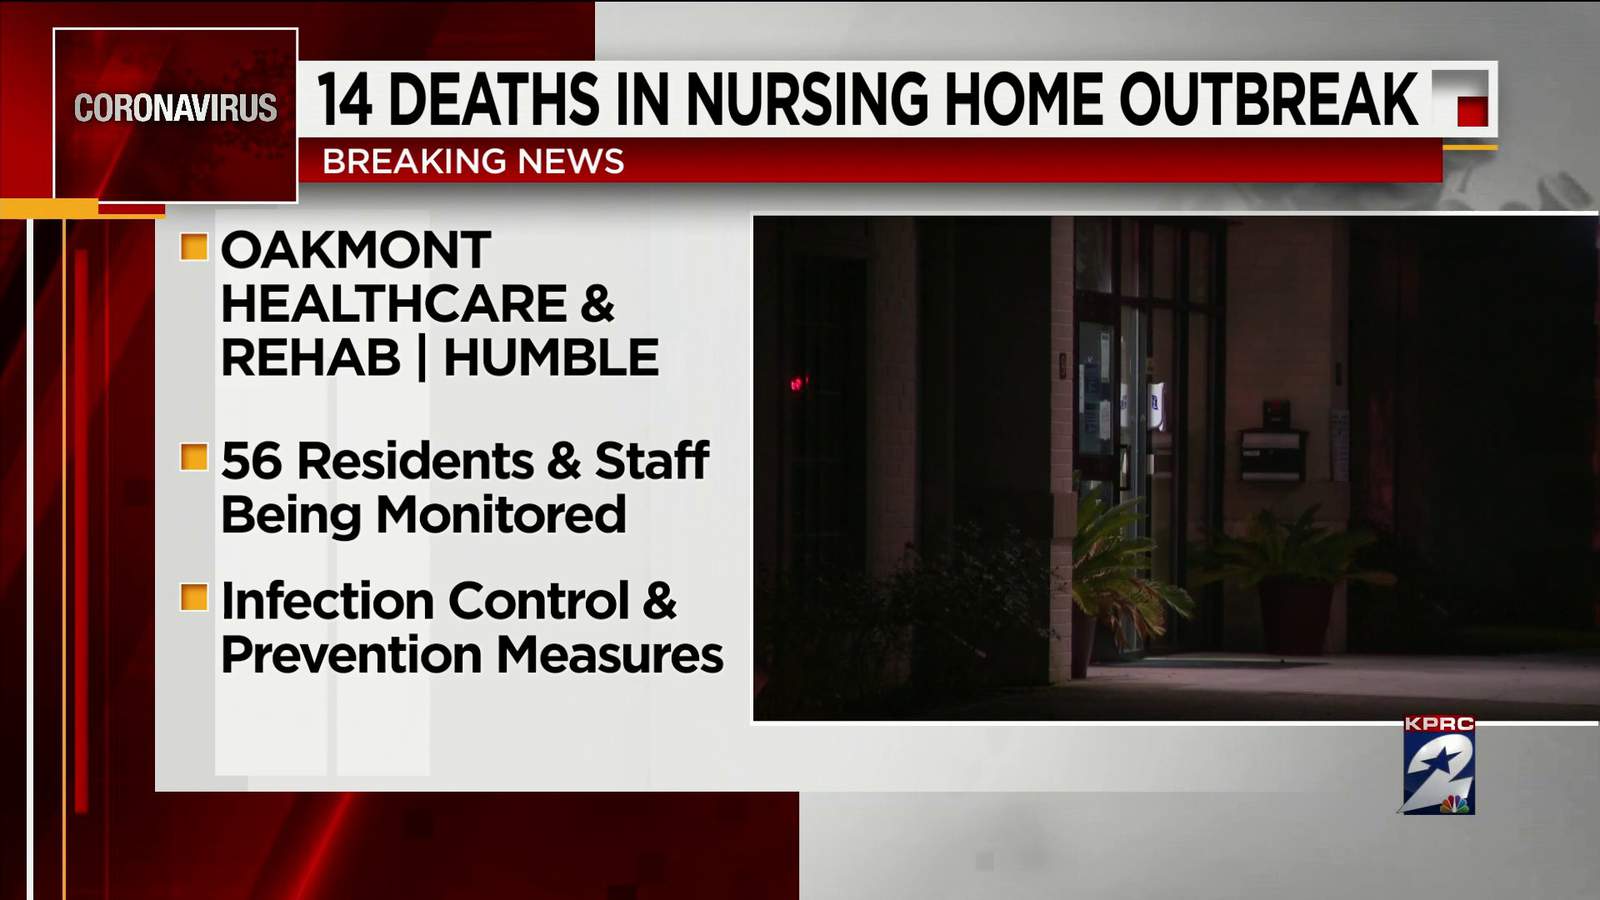 COVID-19 outbreak blamed for 14 deaths at Humble healthcare facility